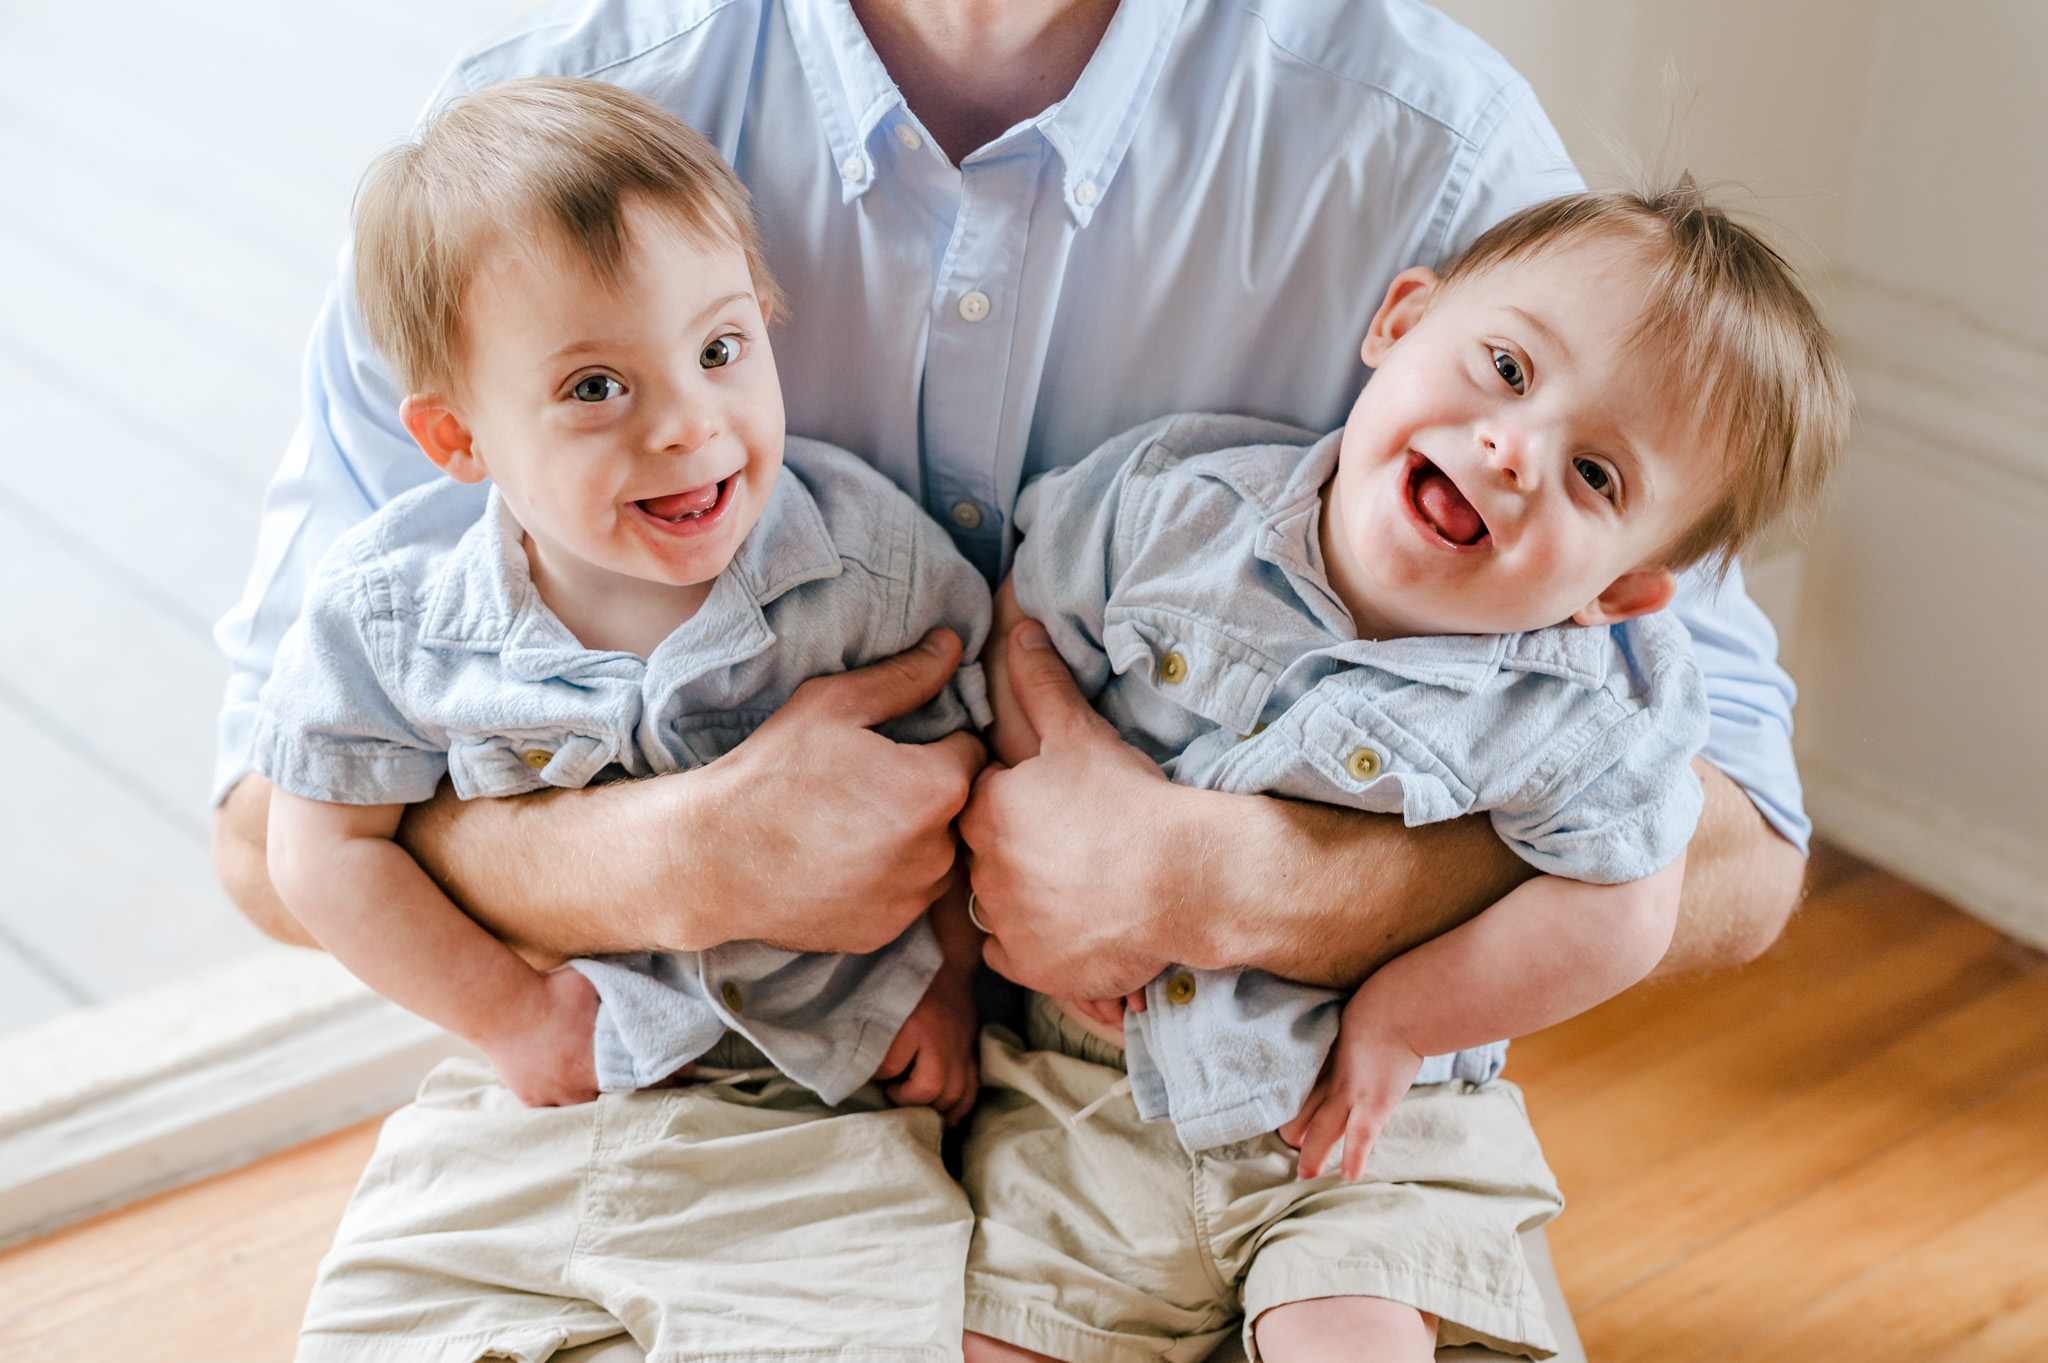 Identical twins with Down syndrome sit on their dad's lap and smile at the camera. Morgan's Wonderland is a great resource for special needs families in South Texas.